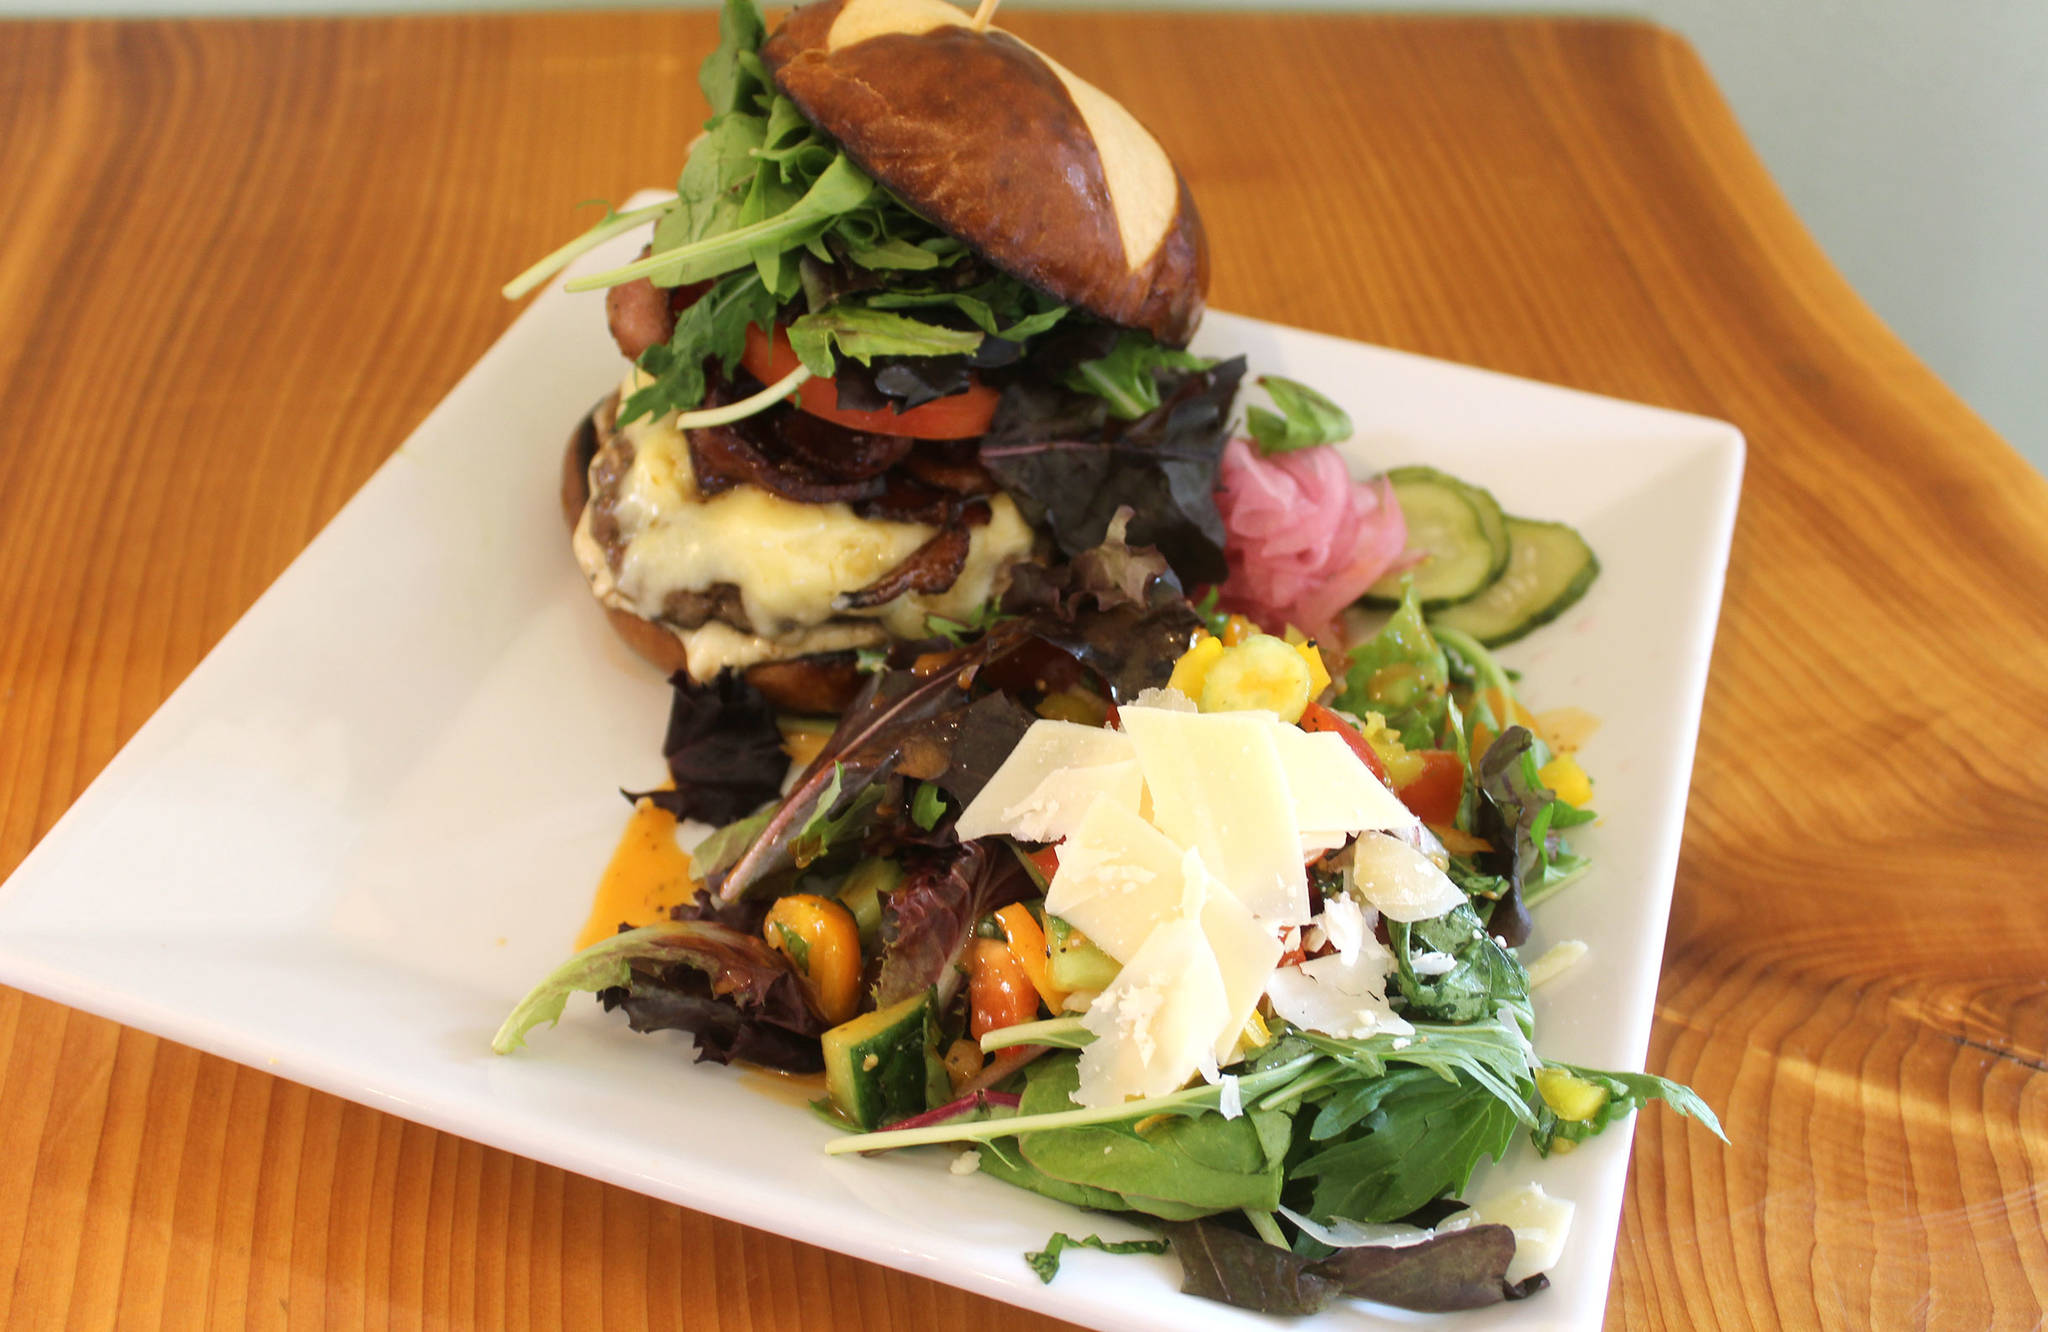 The 5511 Bistro at Blooms Winery dishes out Three Sisters Beef burgers and island fresh salads from local farms. Tables are handmade by winery owner Ken Bloom. Photo by Wendy Leigh/South Whidbey Record